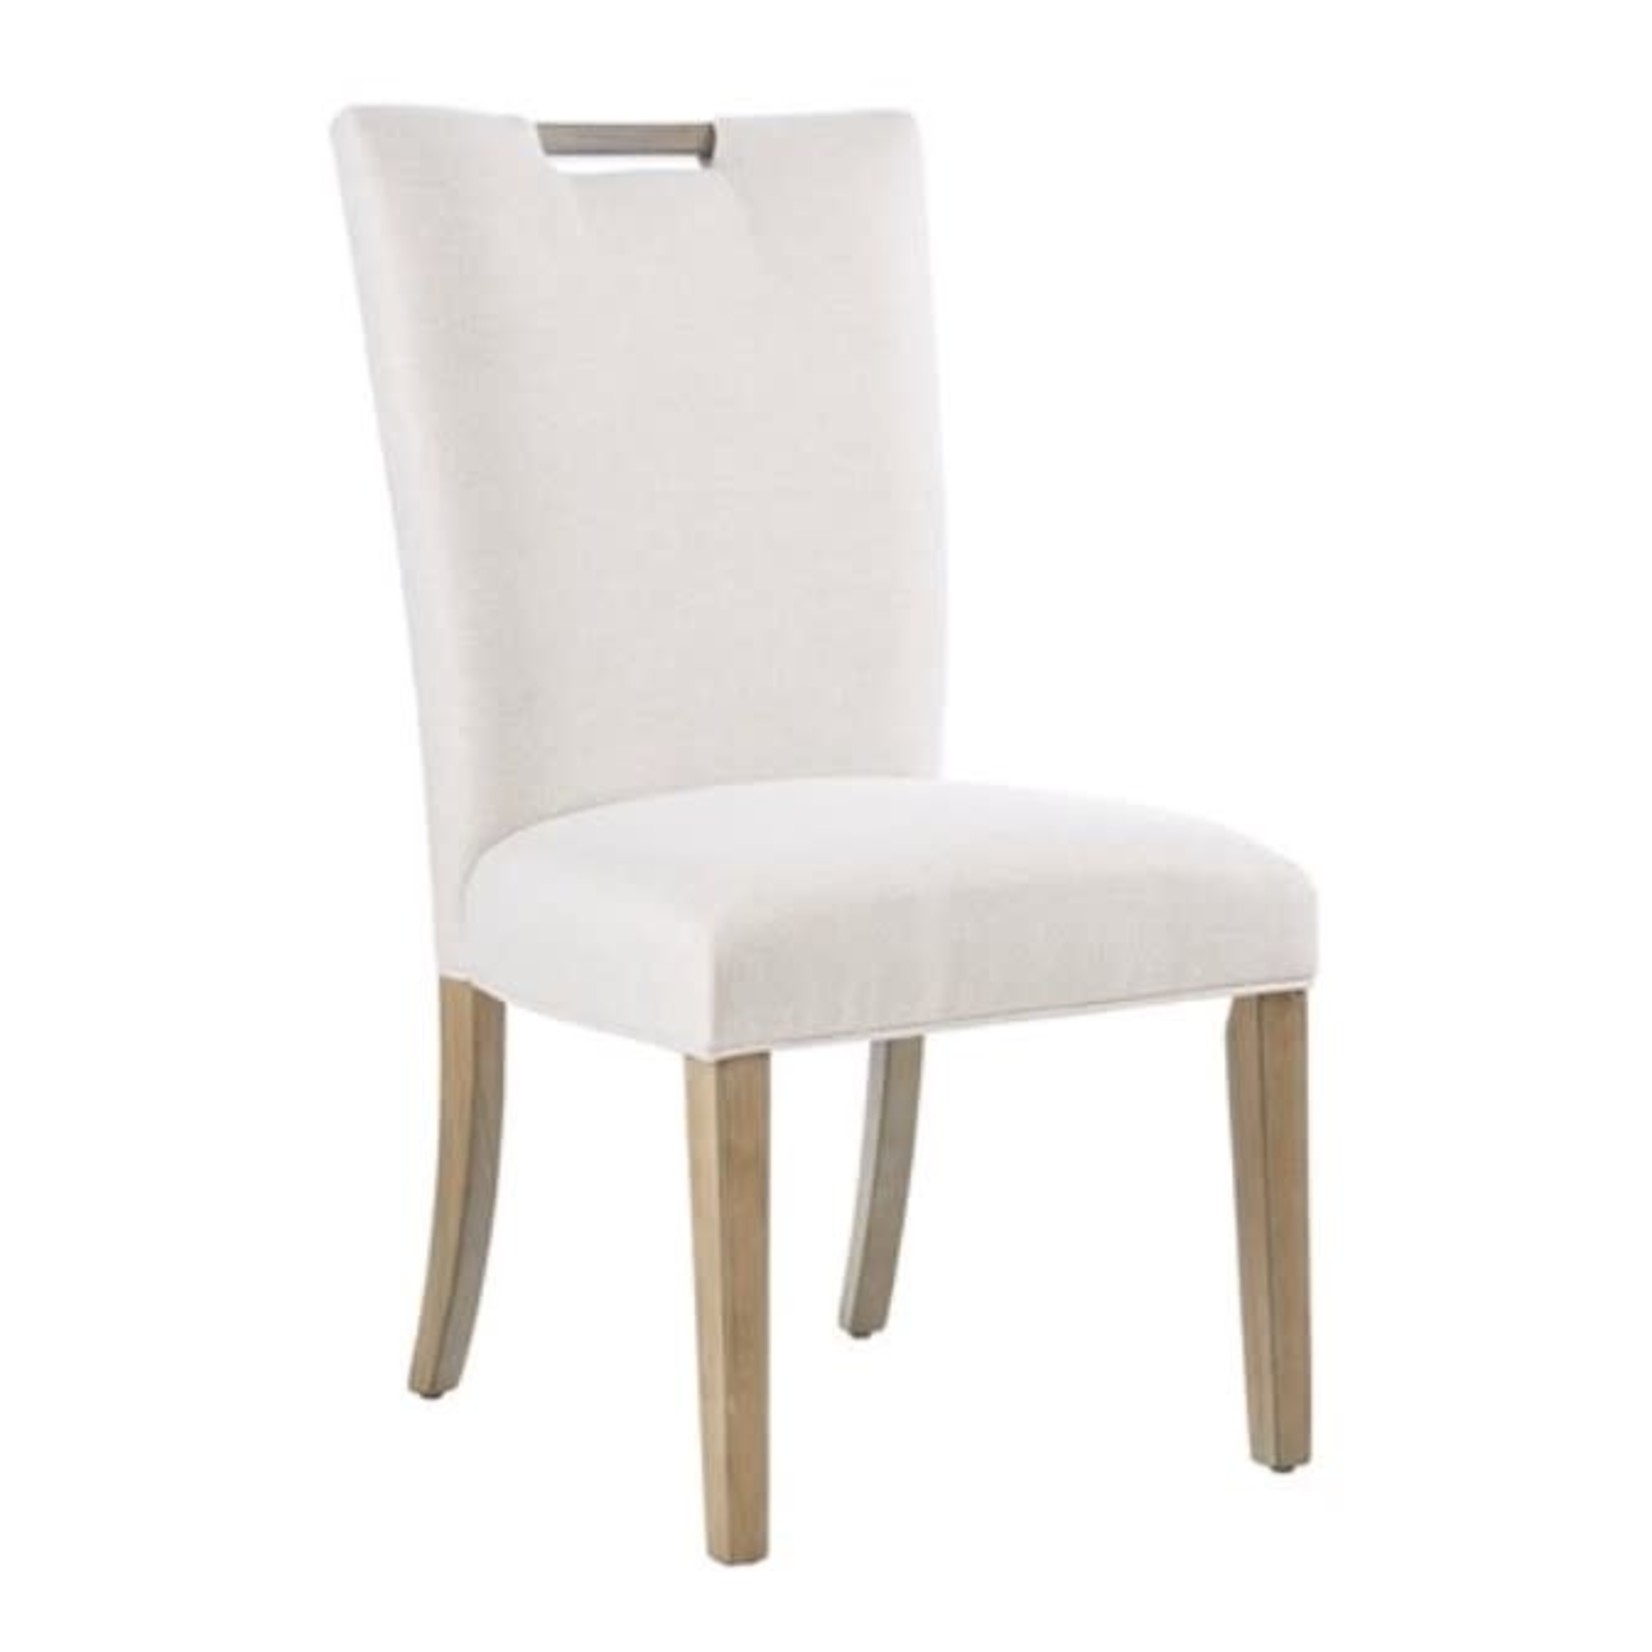 Mickler & Co. Braxton Dining Chair-Set of 2